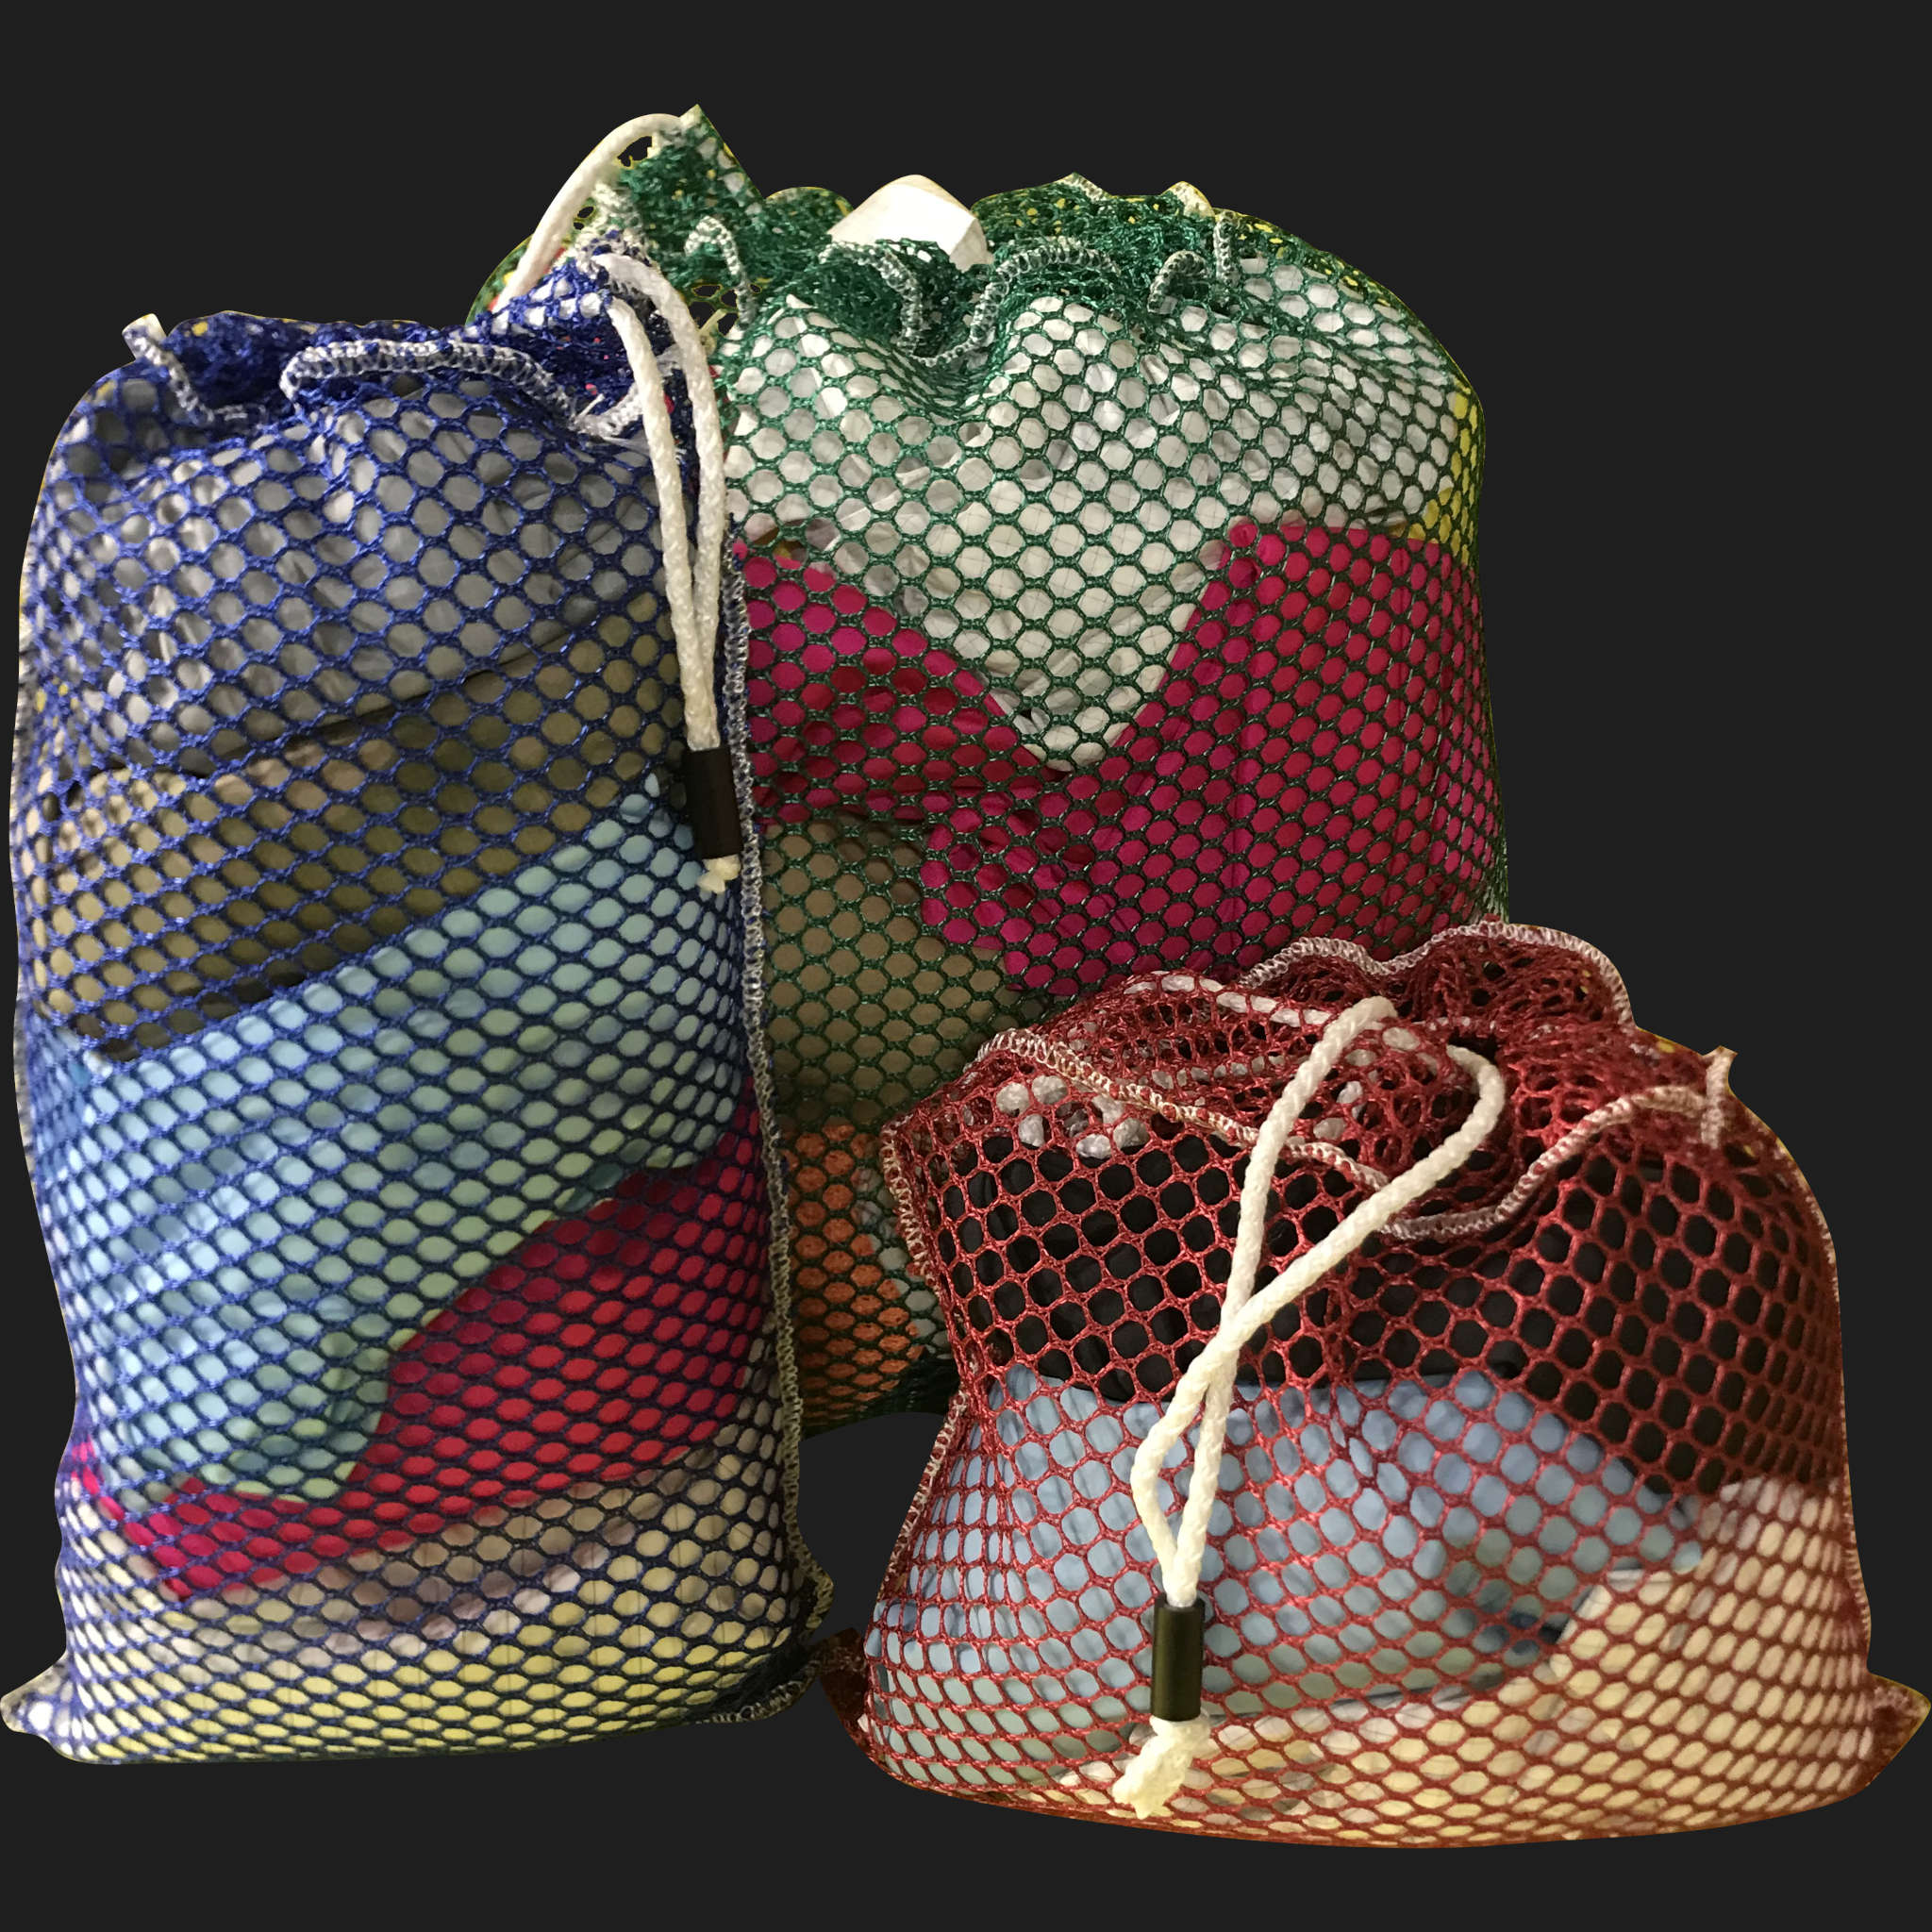 56" x 70" Customized Mesh-Net-Laundry Bags Heavy Duty with Cord and barrellock closure